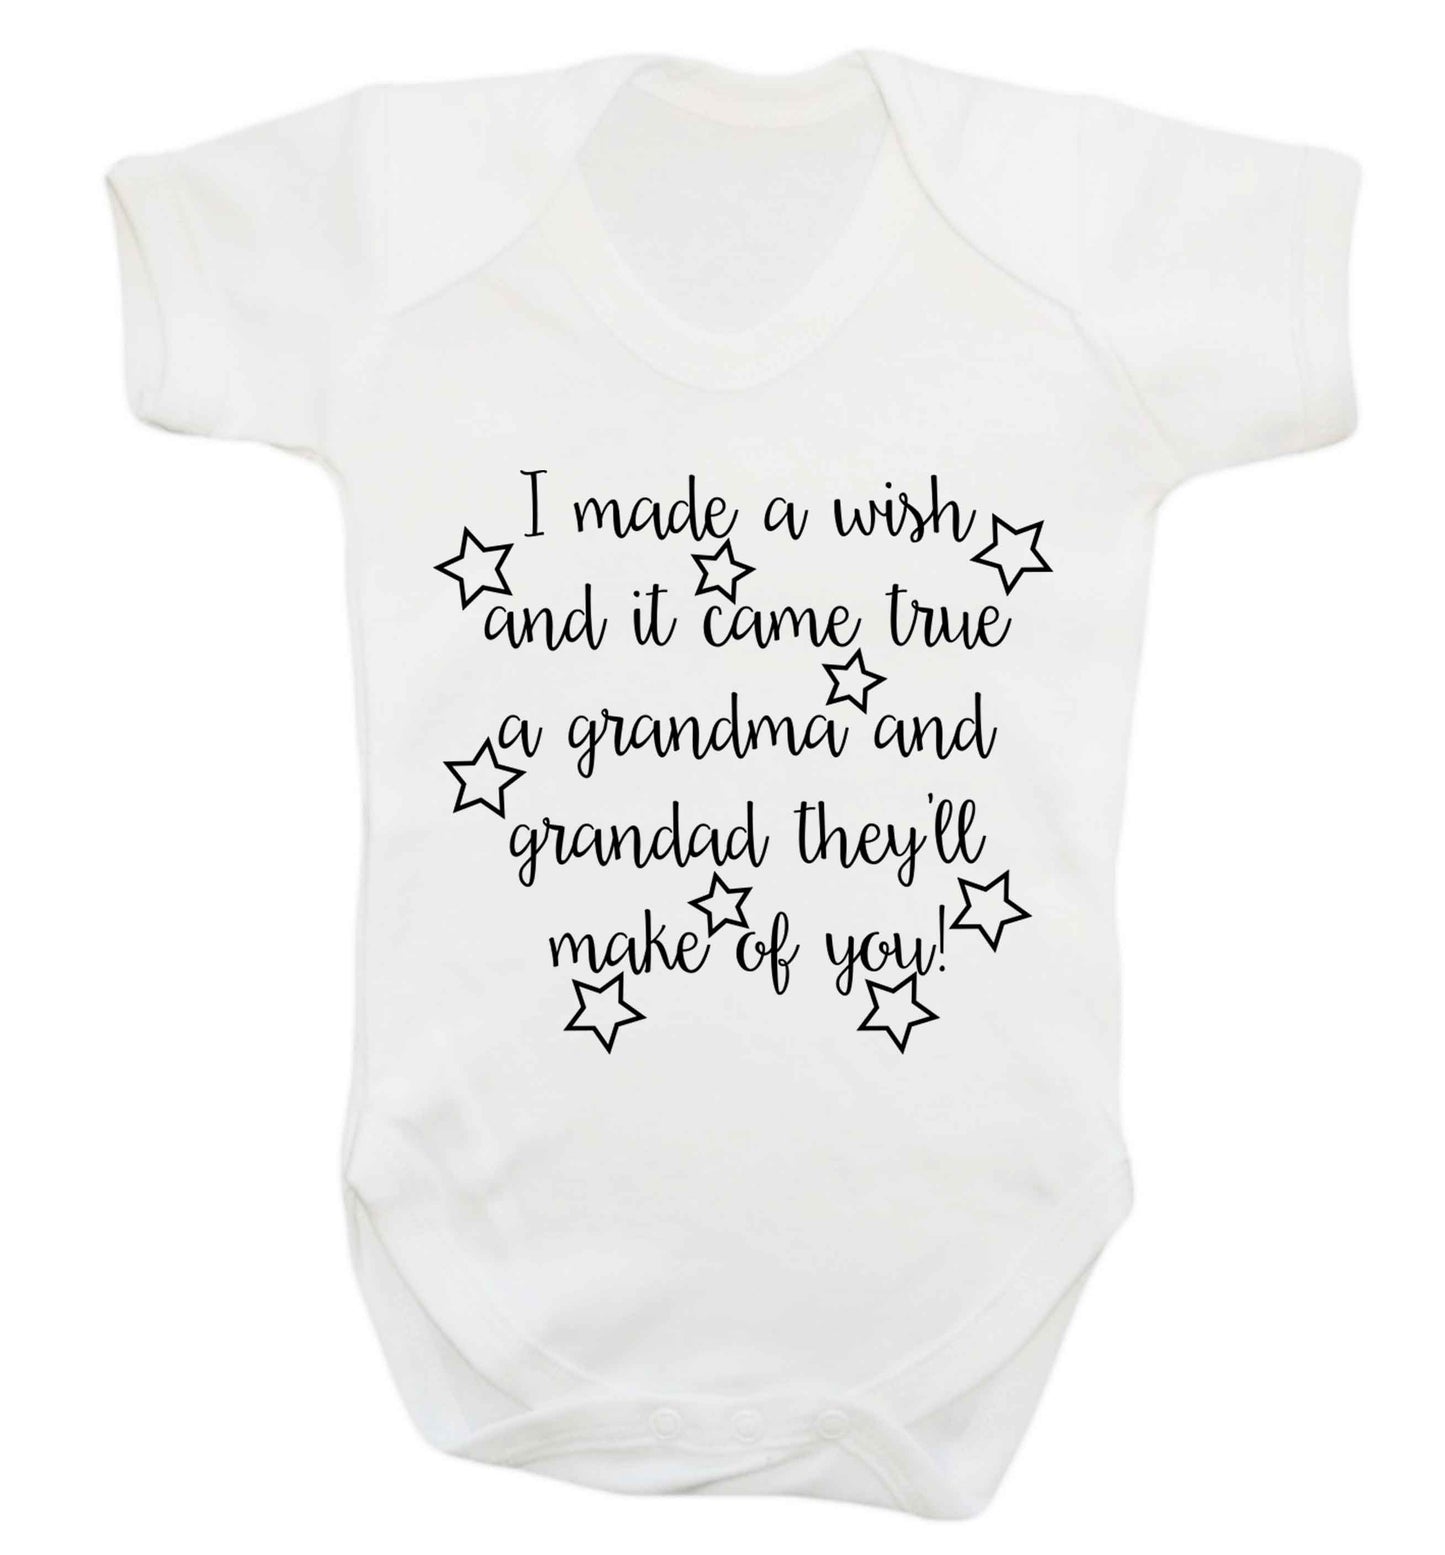 I made a wish and it came true a grandma and grandad they'll make of you! Baby Vest white 18-24 months